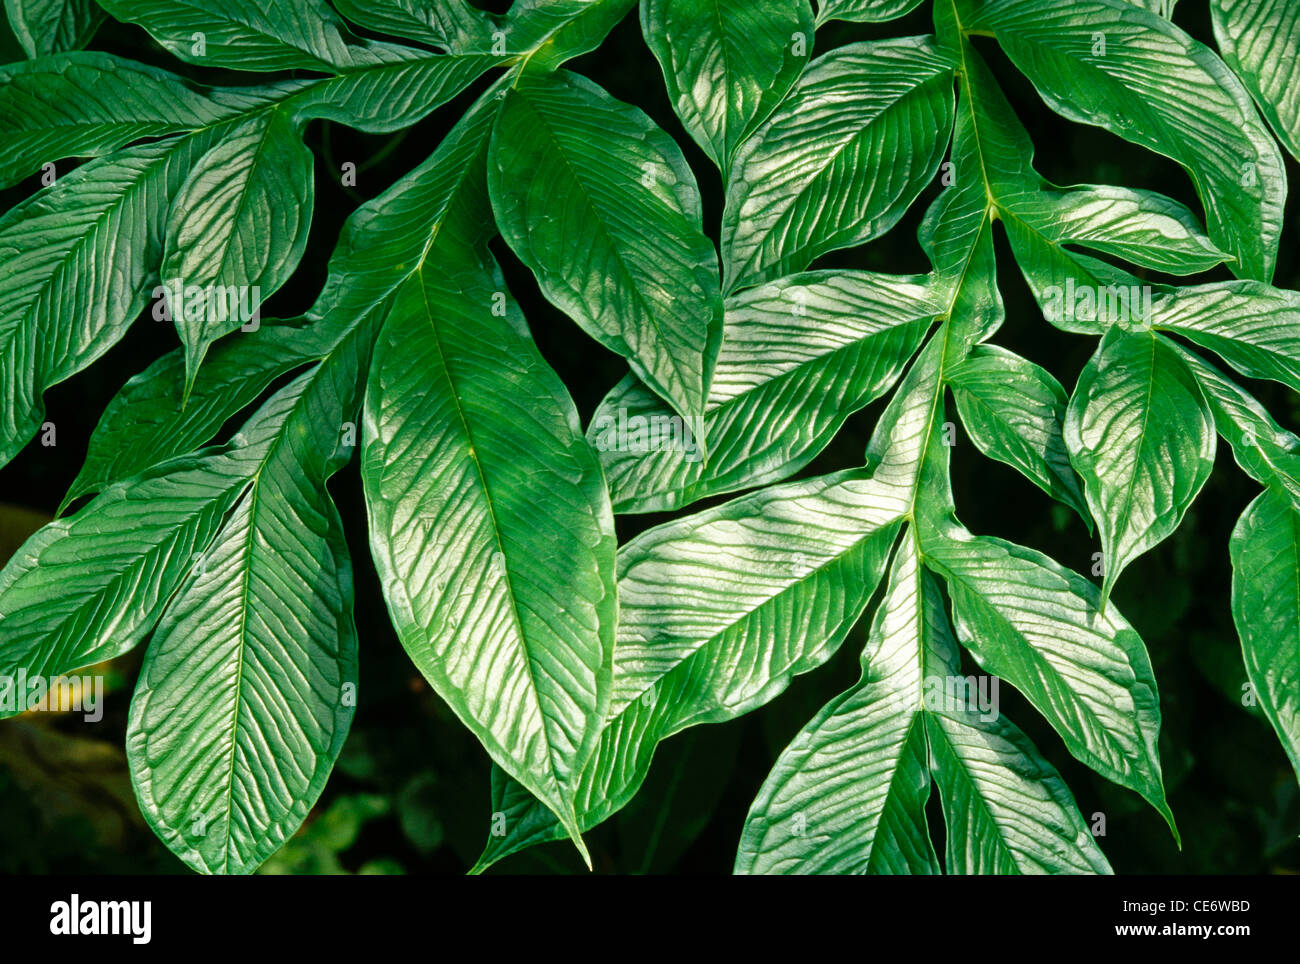 RHS 86050 : green leaf leaves design pattern graphic abstract background doublespread Stock Photo